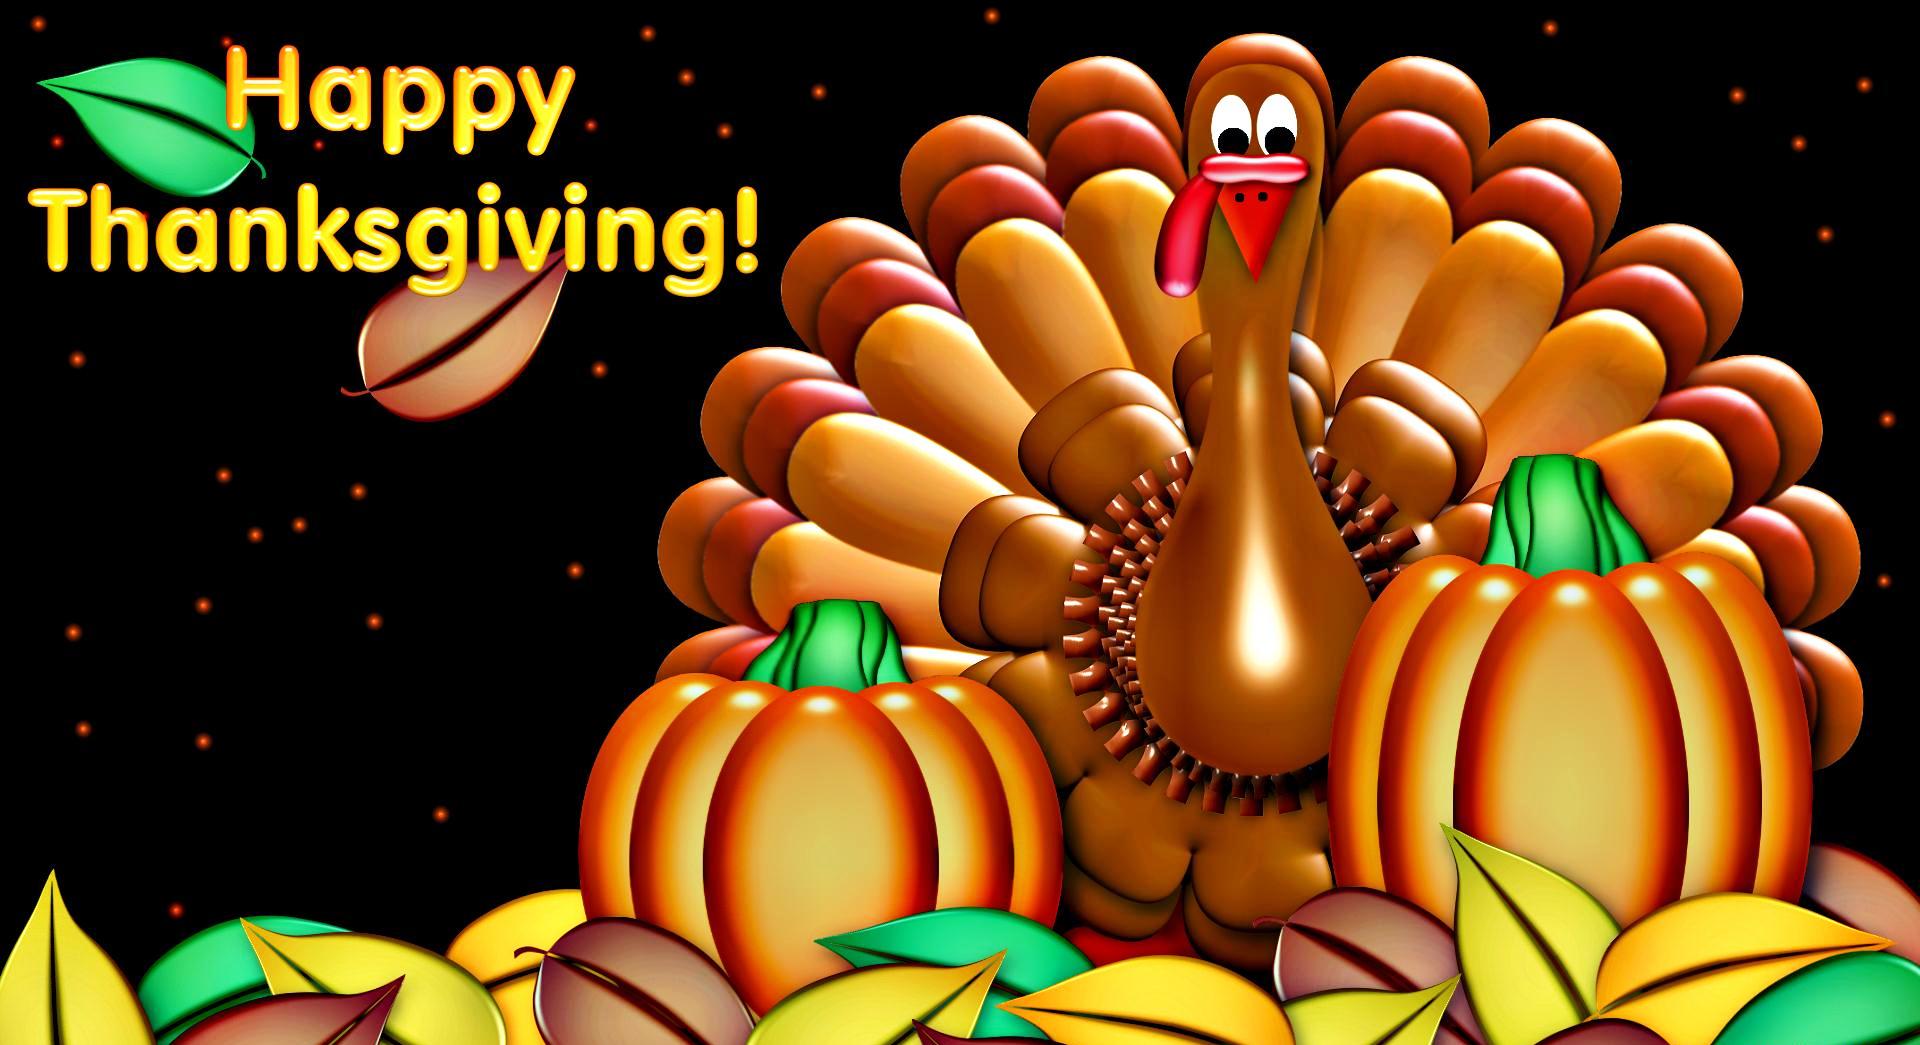 Animated Thanksgiving Desktop Wallpaper Background Pictures